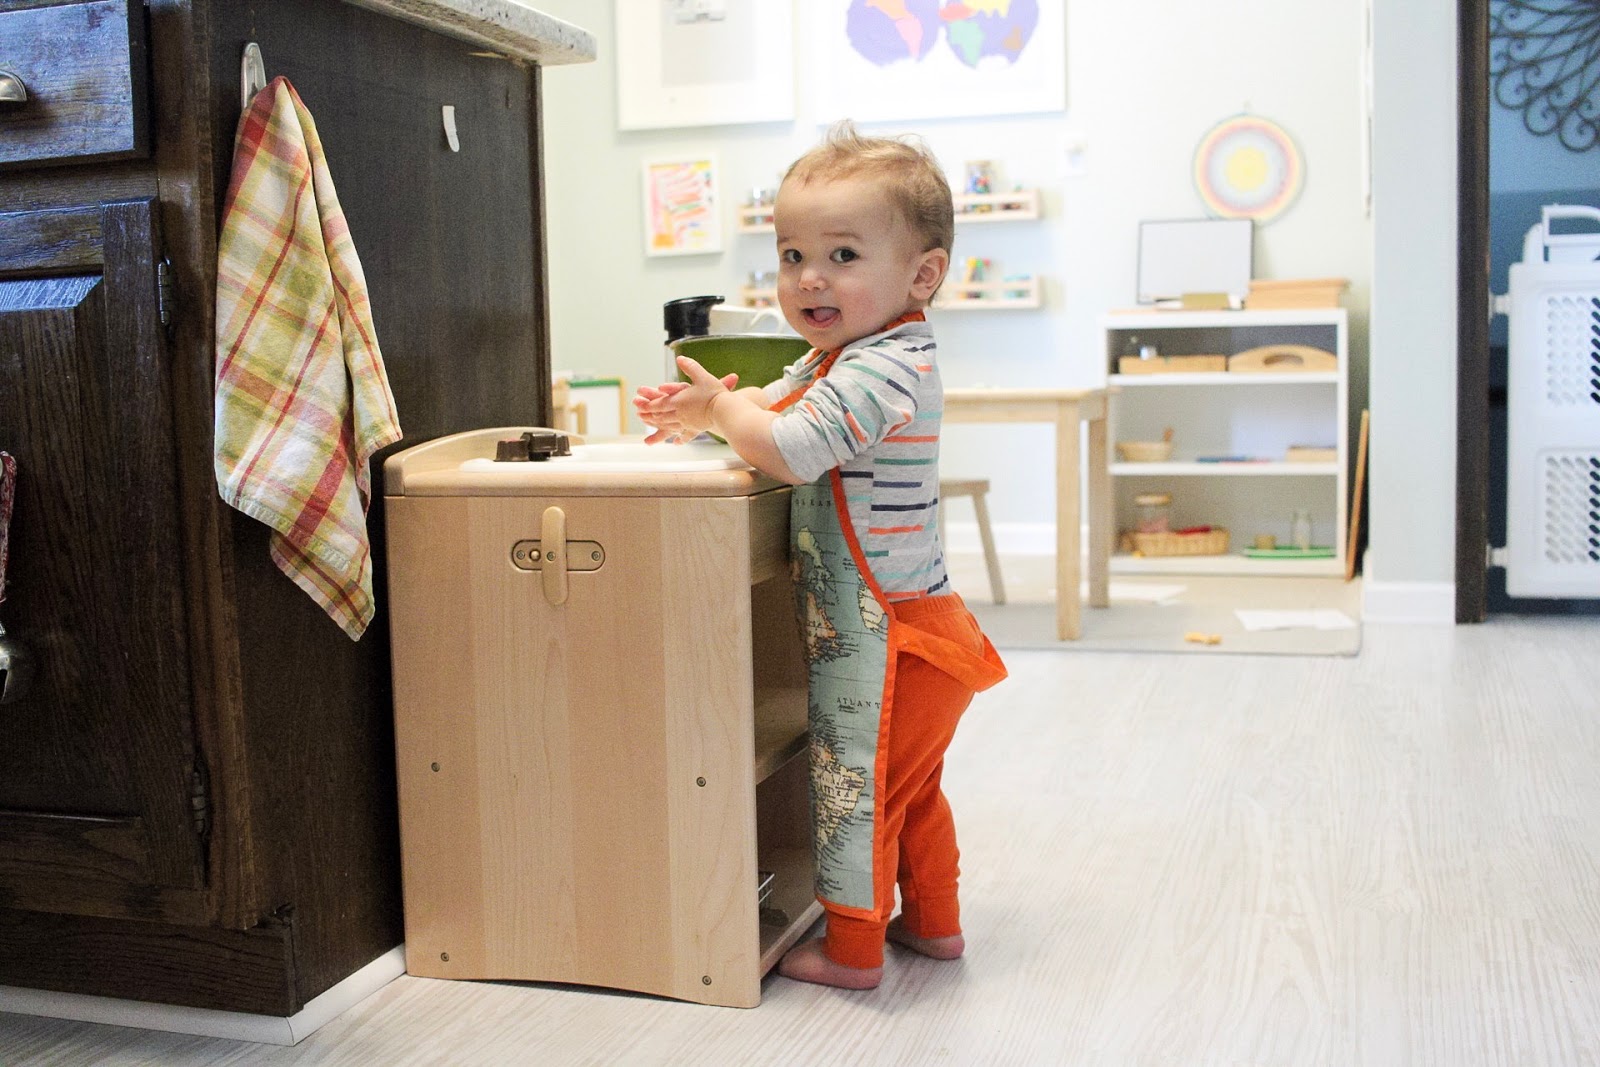 3 Montessori ways to consider adding independent hand washing to your home for your toddler.